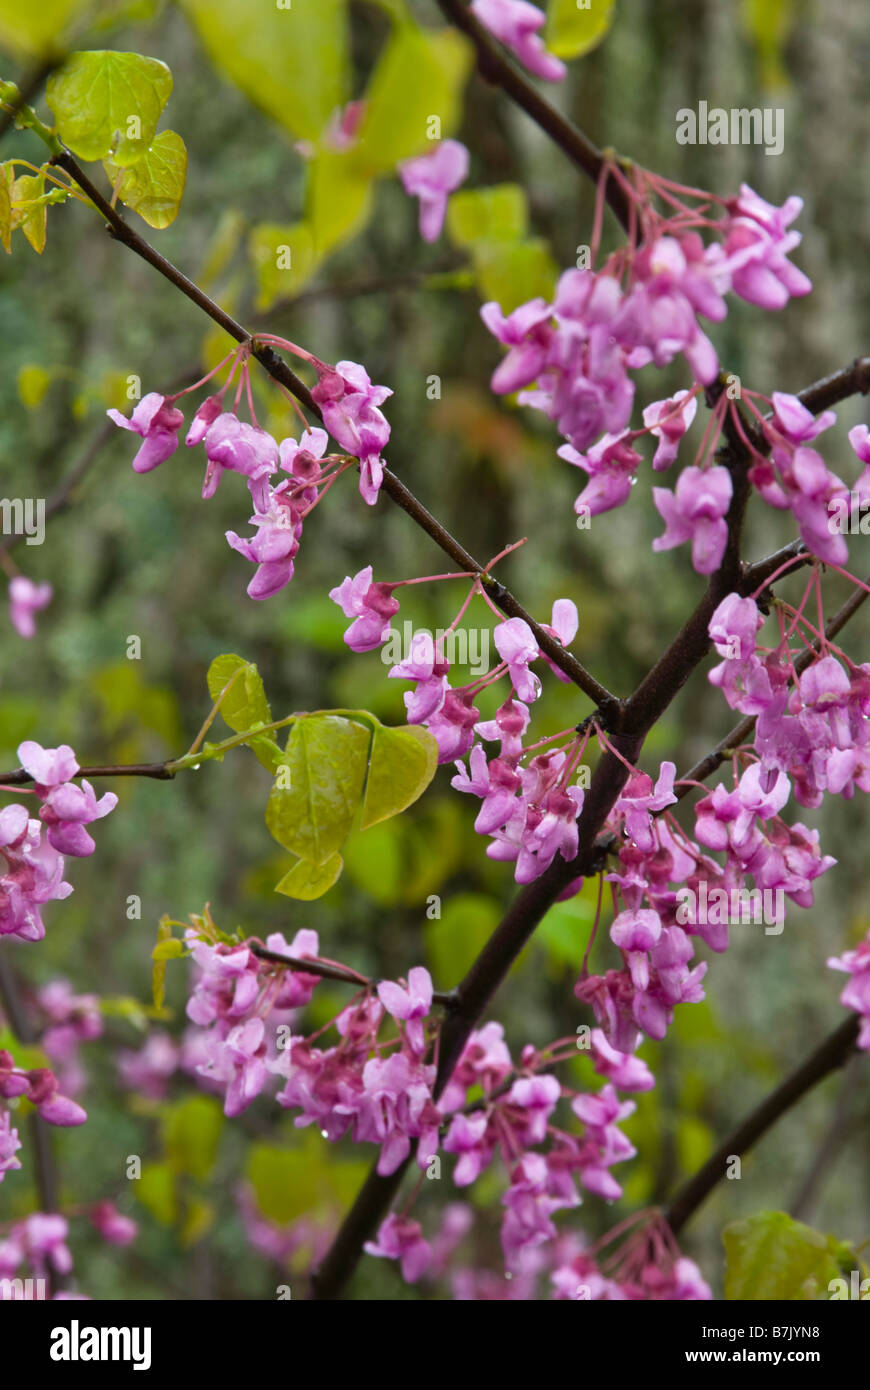 Blossoms and twigs of the redbud tree (Cercis canadensis) which is native to the eastern United States. Stock Photo